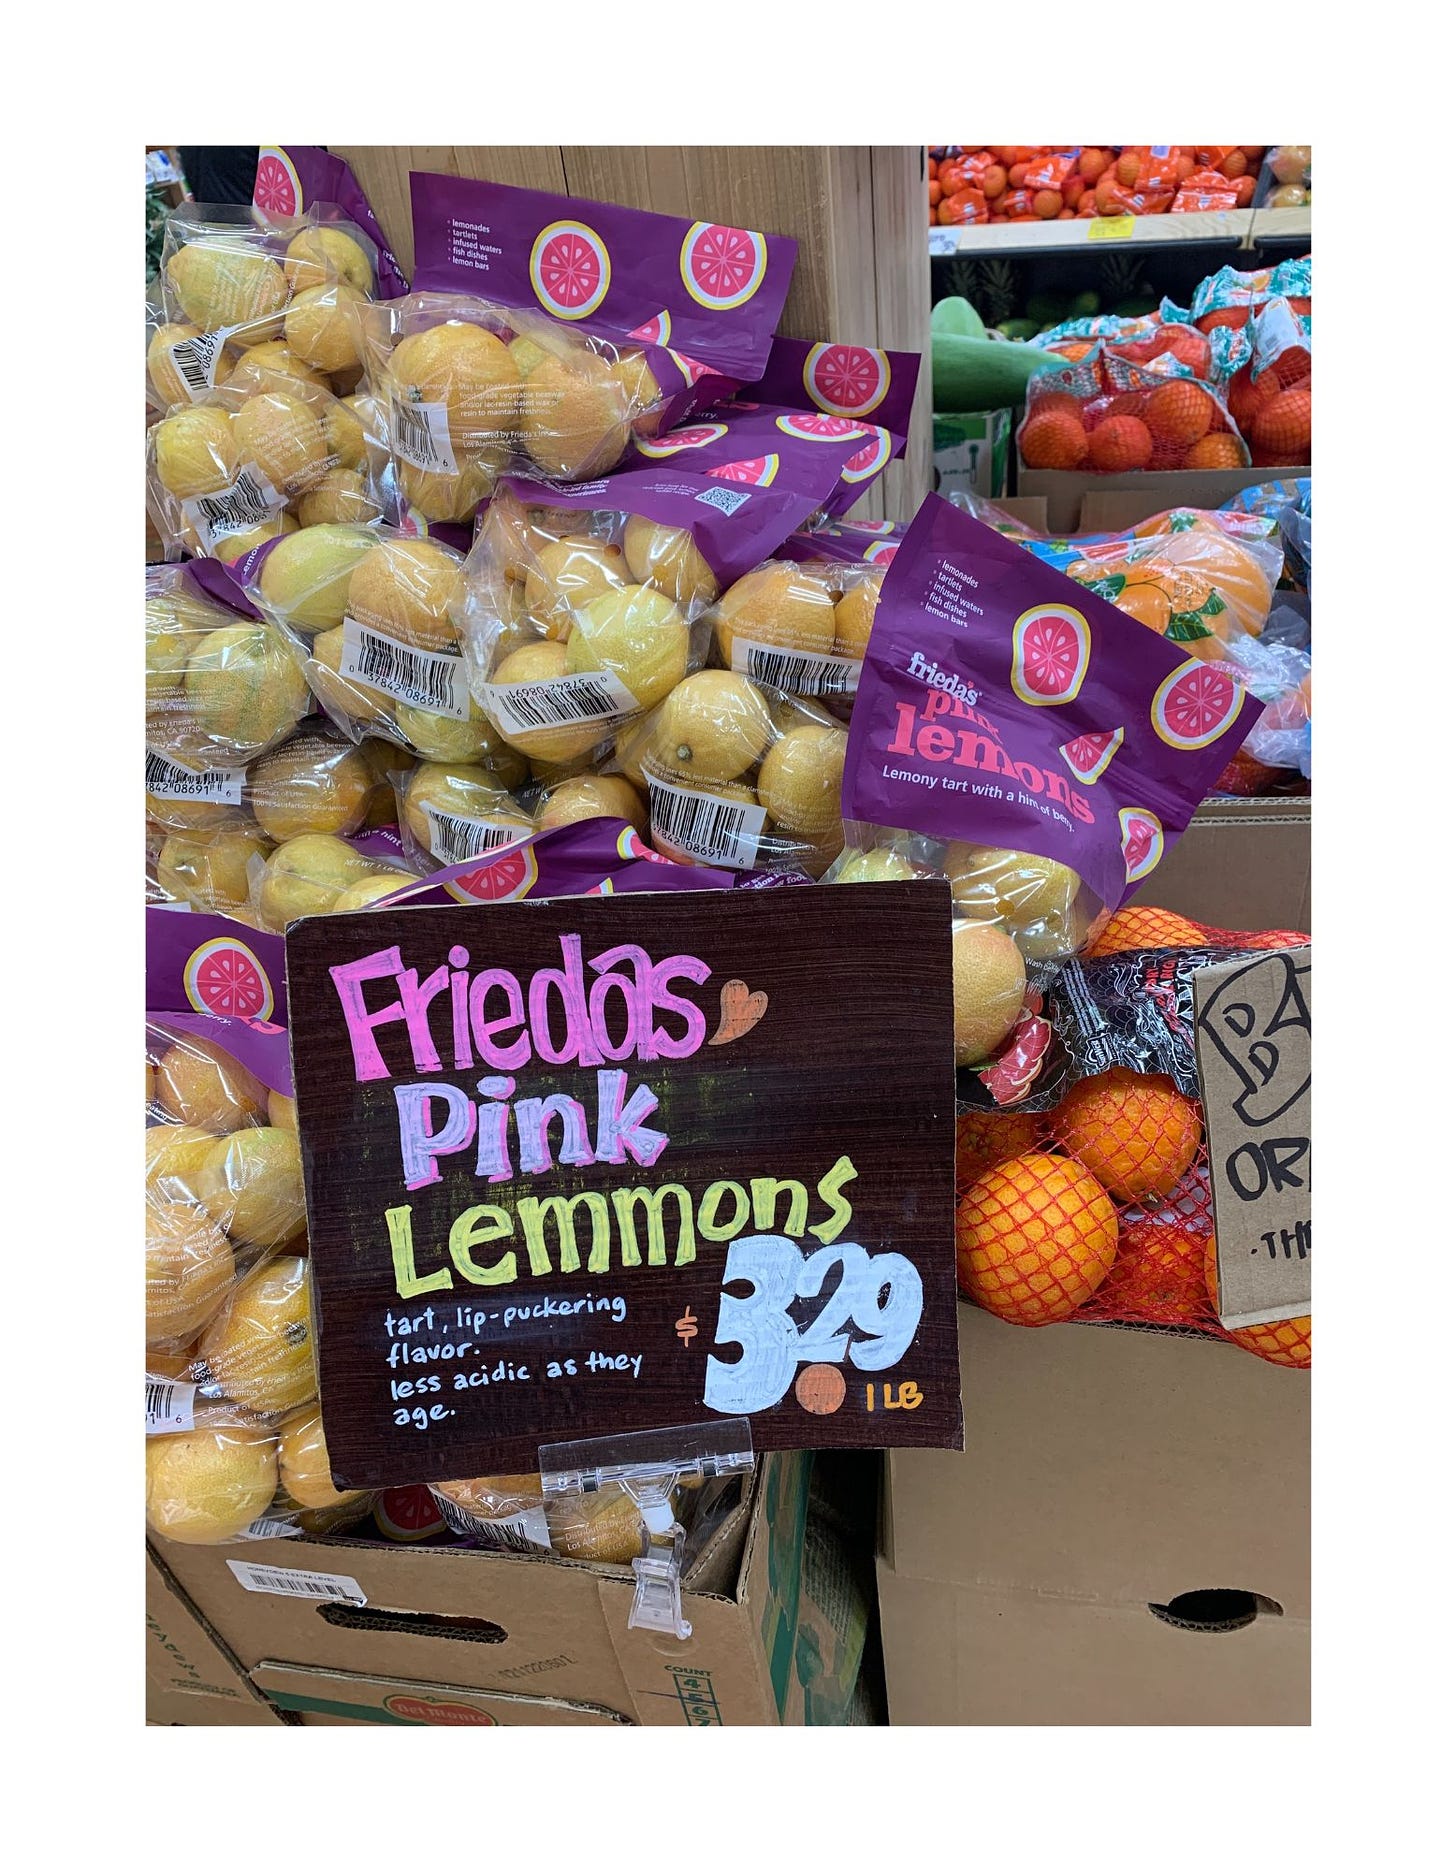 A grocery store display of lemons with a sign that says "Friedas Pink Lemmons"